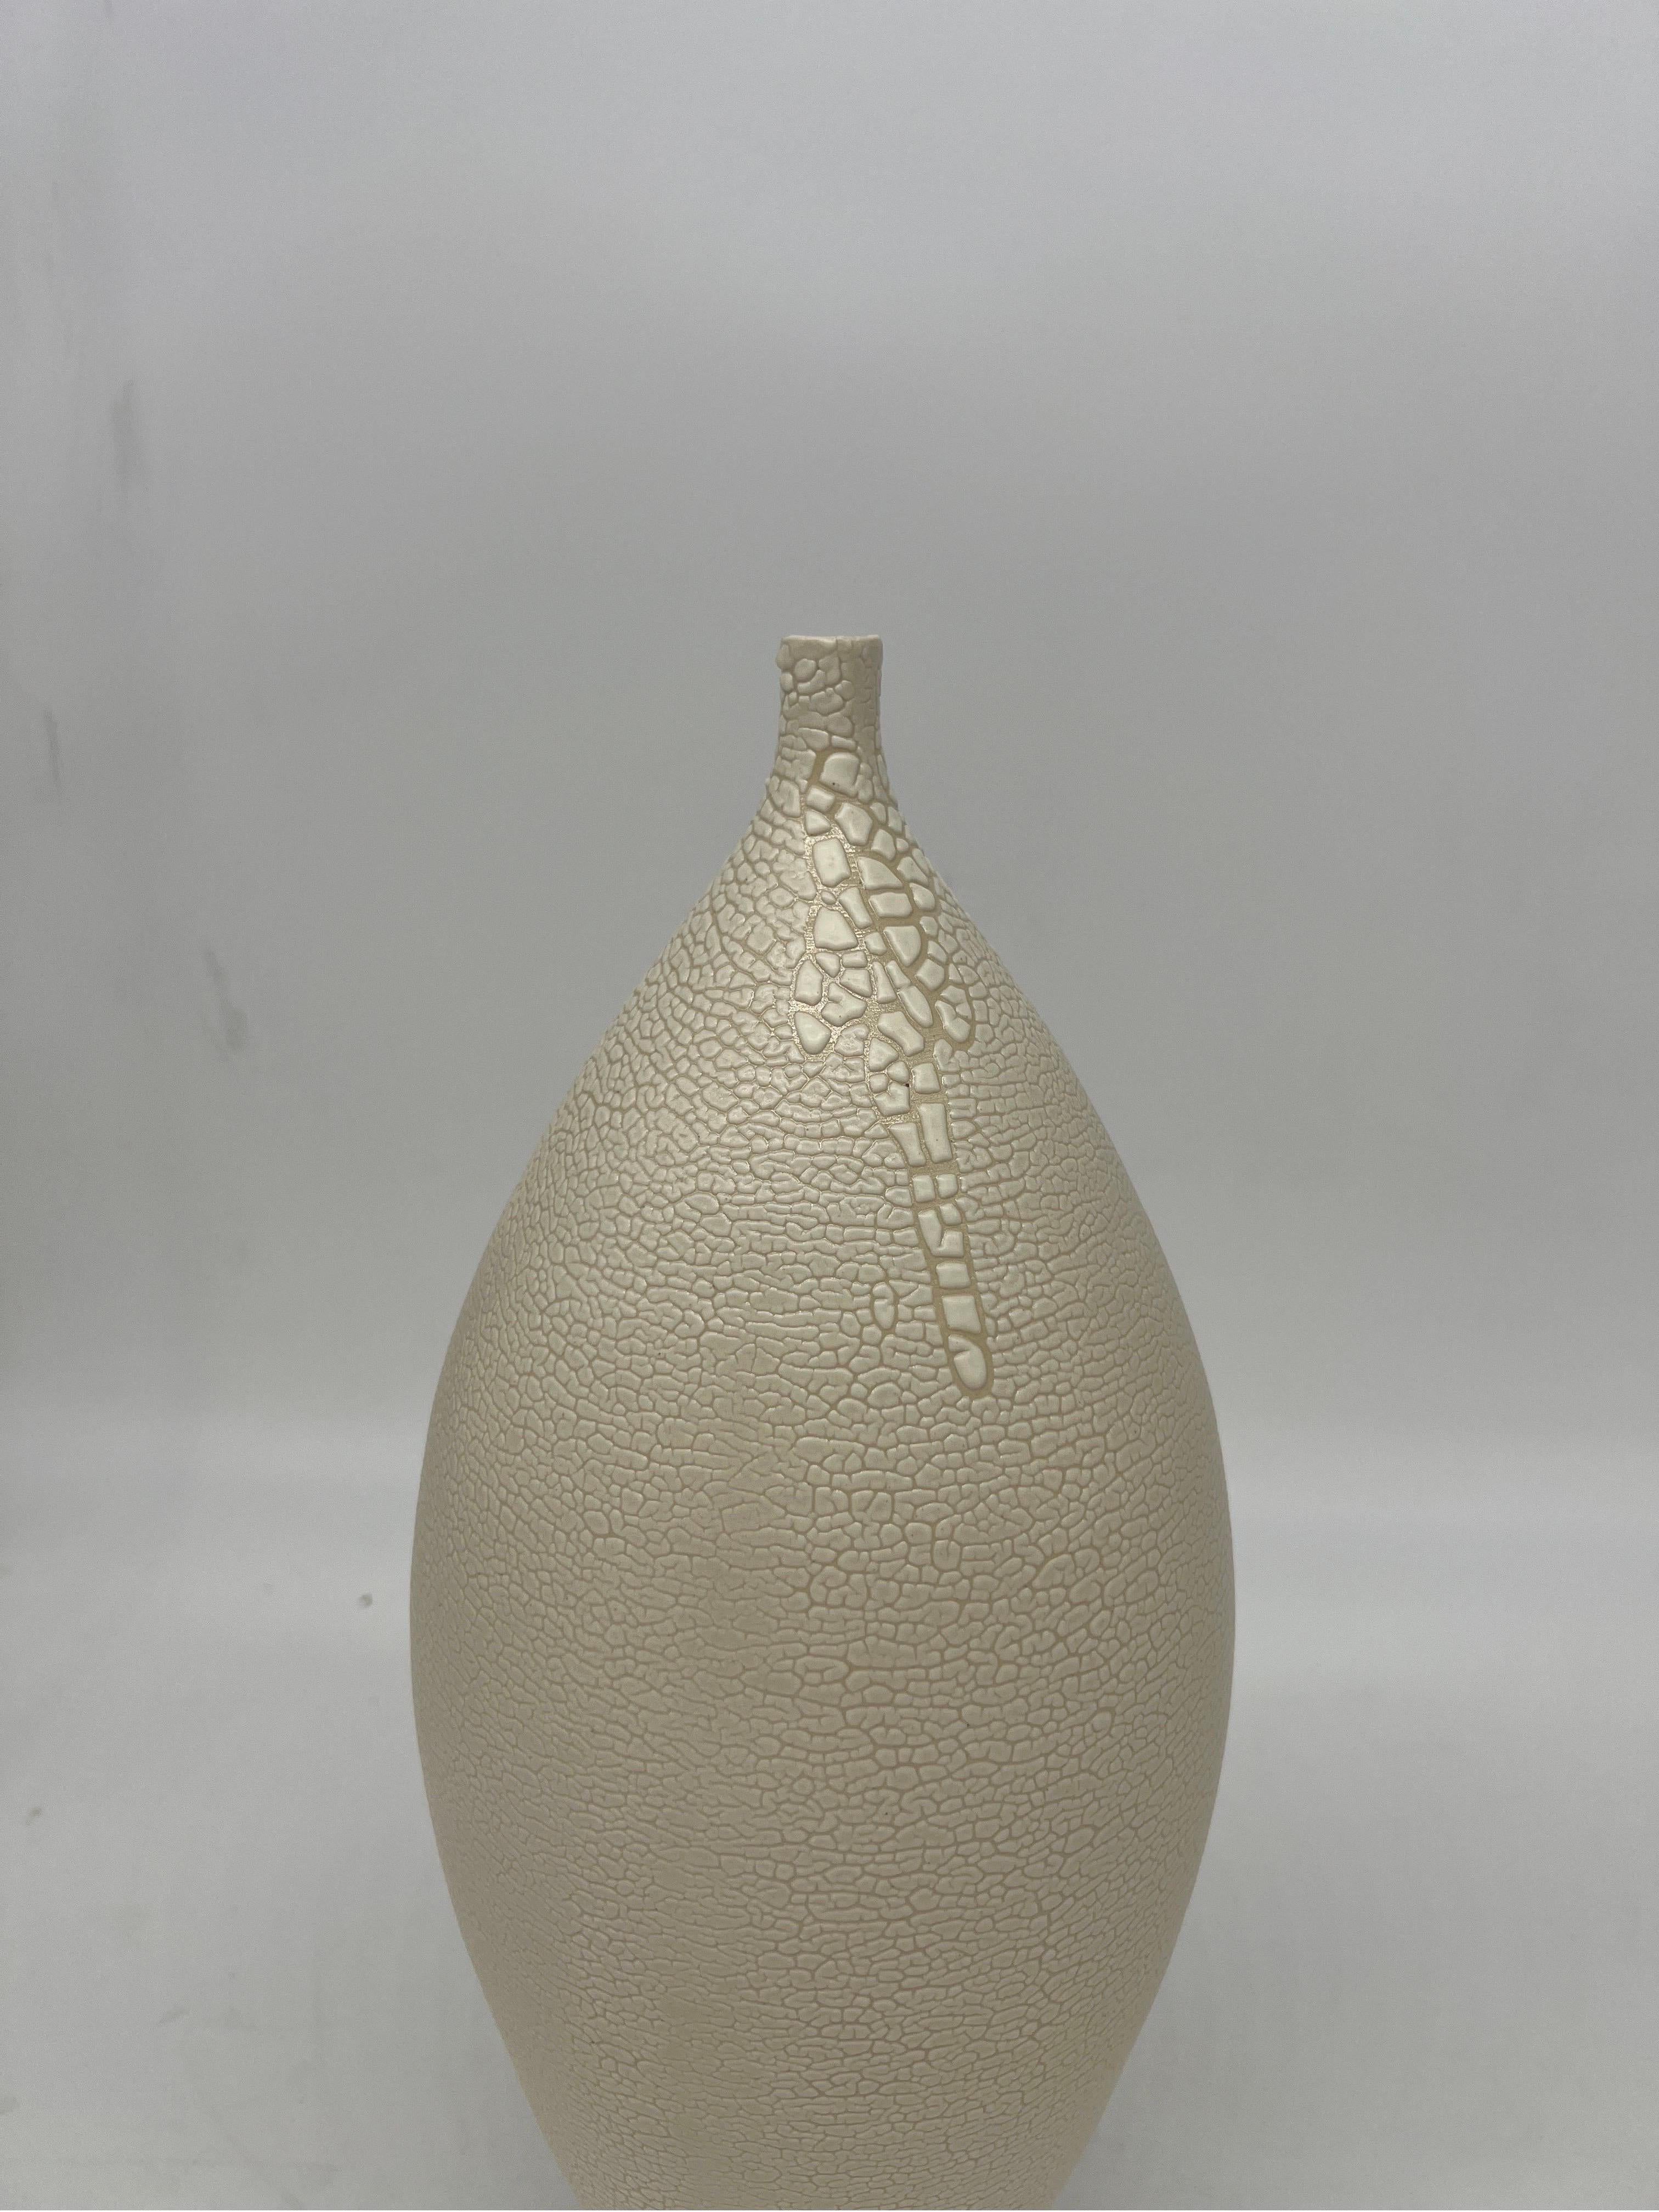 This vase is done by an unidentified artisan, likely late 20th century. Purchased from the estate of an accomplished doctor in Atlanta. The vase has a white body with sculpted work and a lava glaze styling in the Japanese taste. 